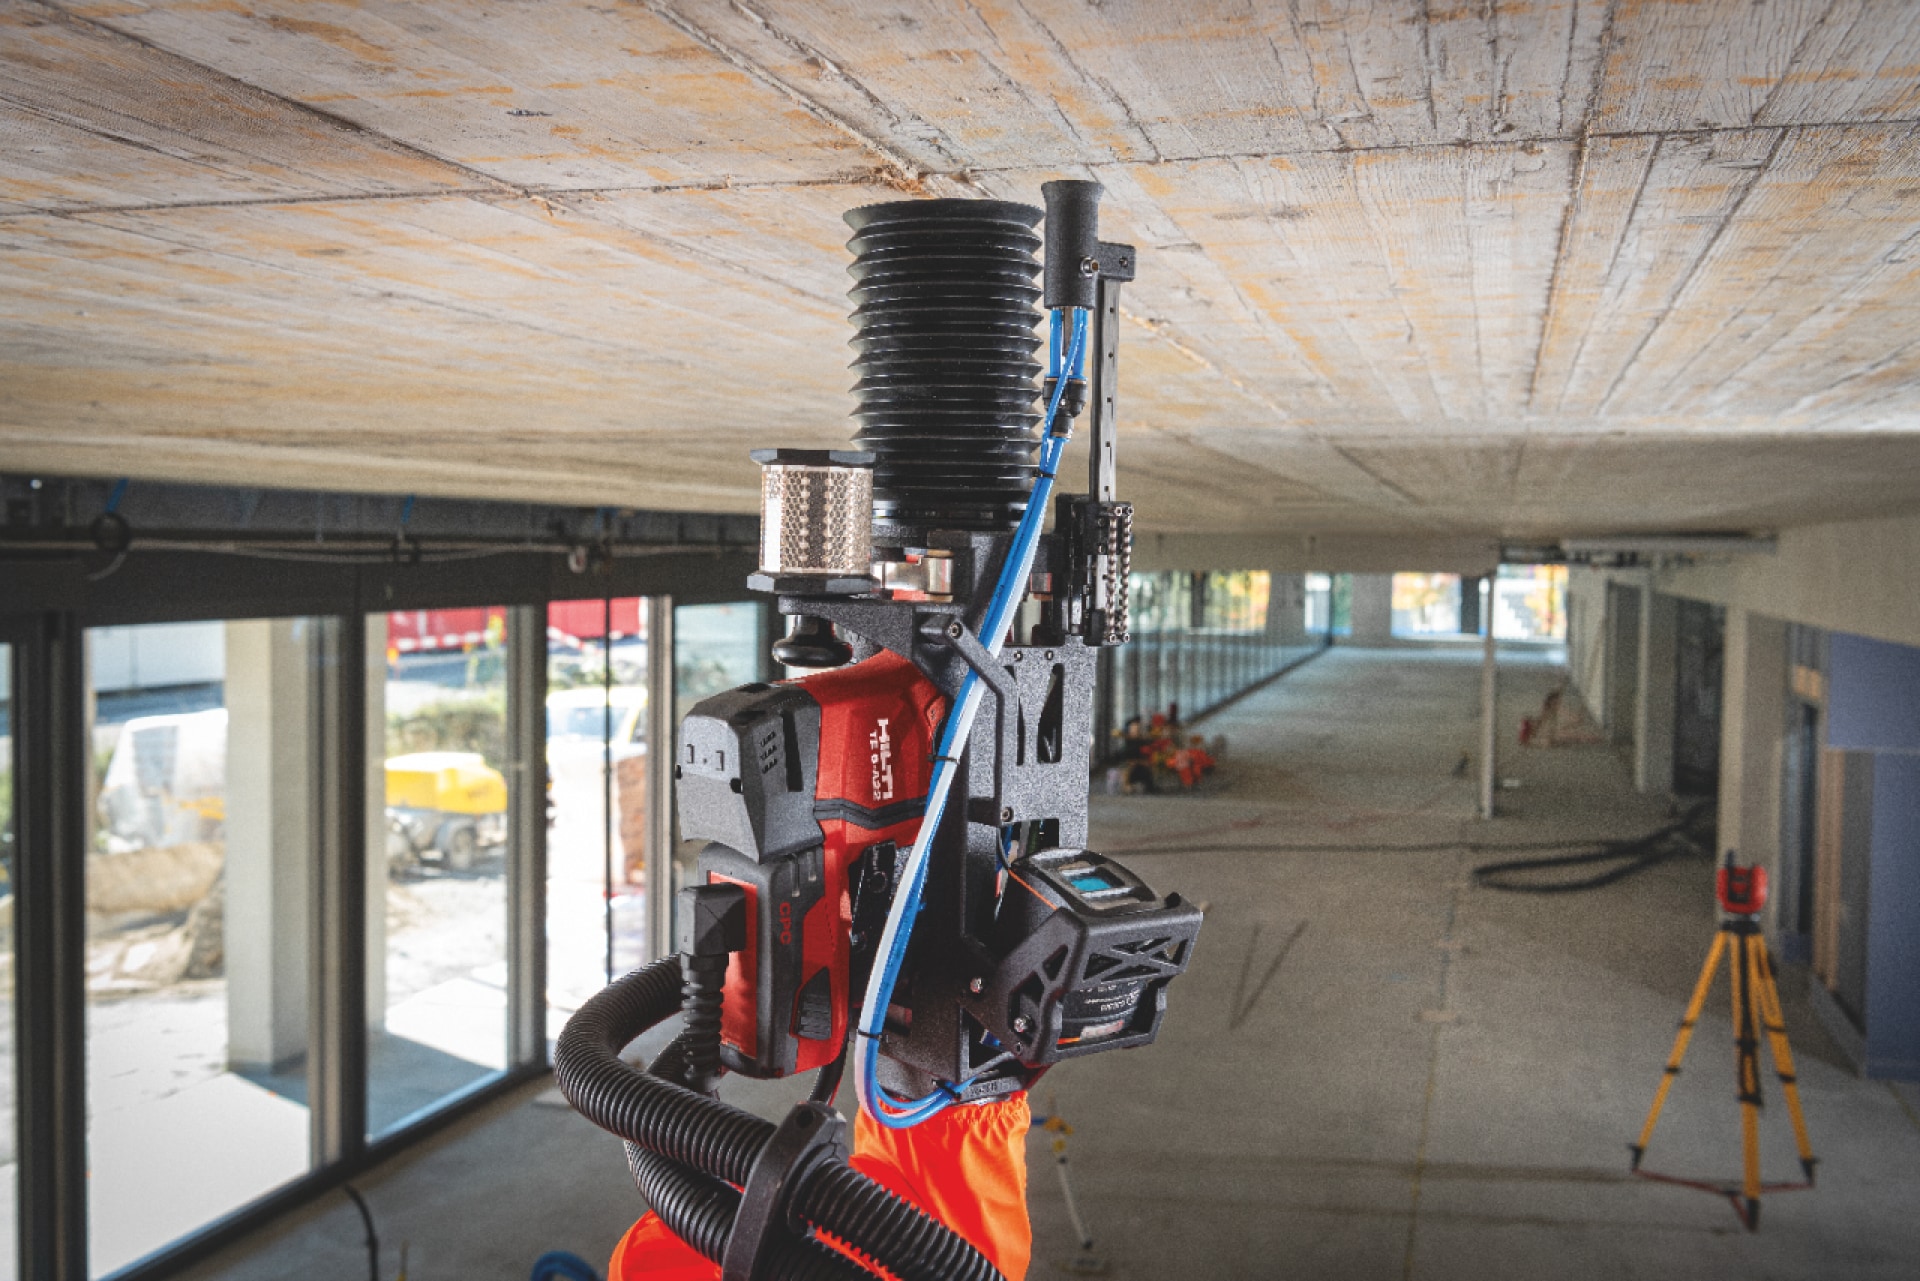 Automated and semi-automated robots can benefit the construction industry in many ways